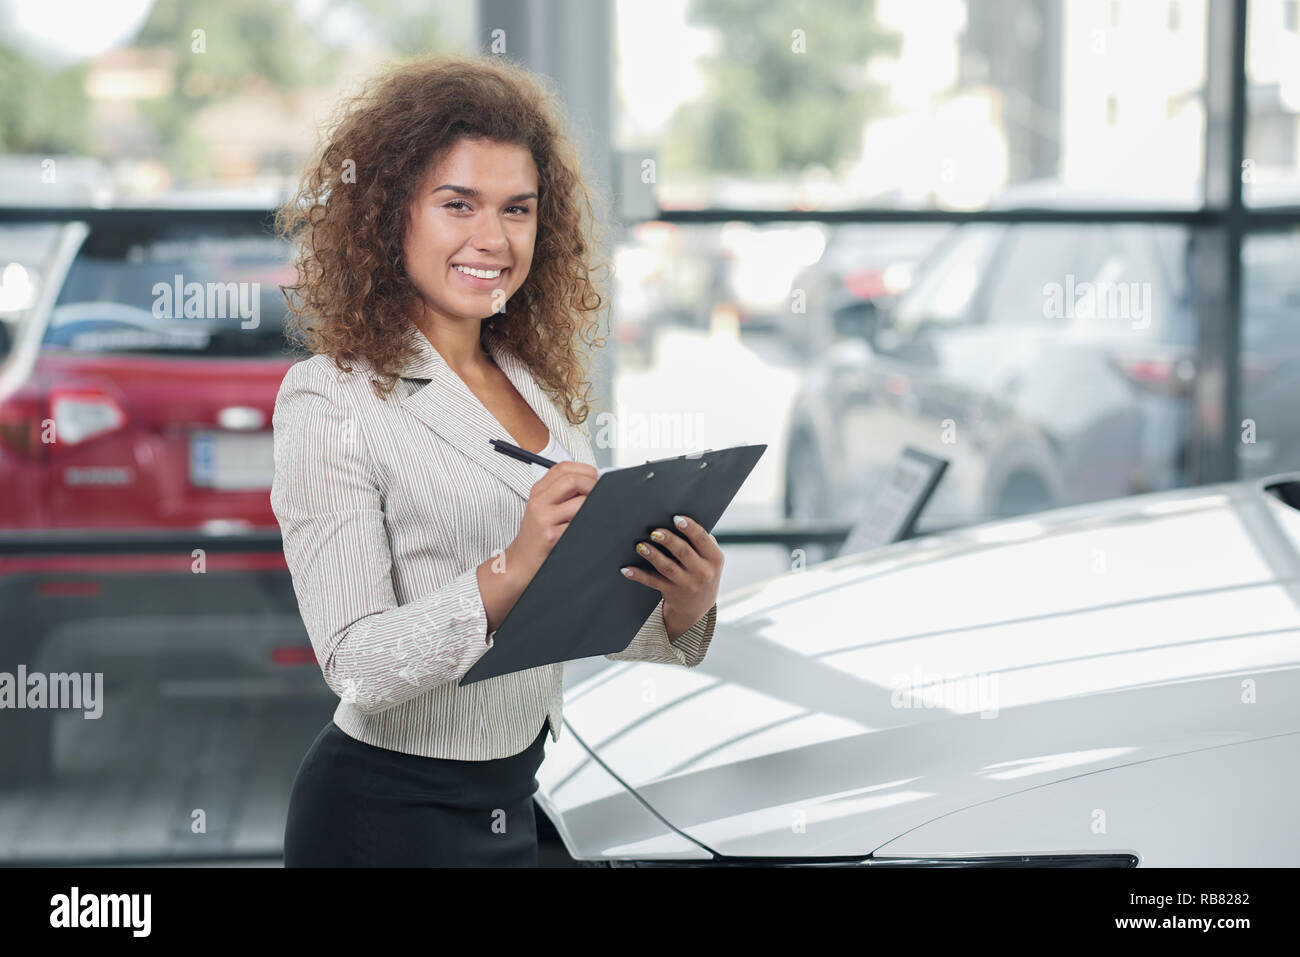 Female manager of car dealership standing in showroom and posing. Pretty woman with curly hair smiling, looking at camera. Car dealer holding black folder and pen. Stock Photo